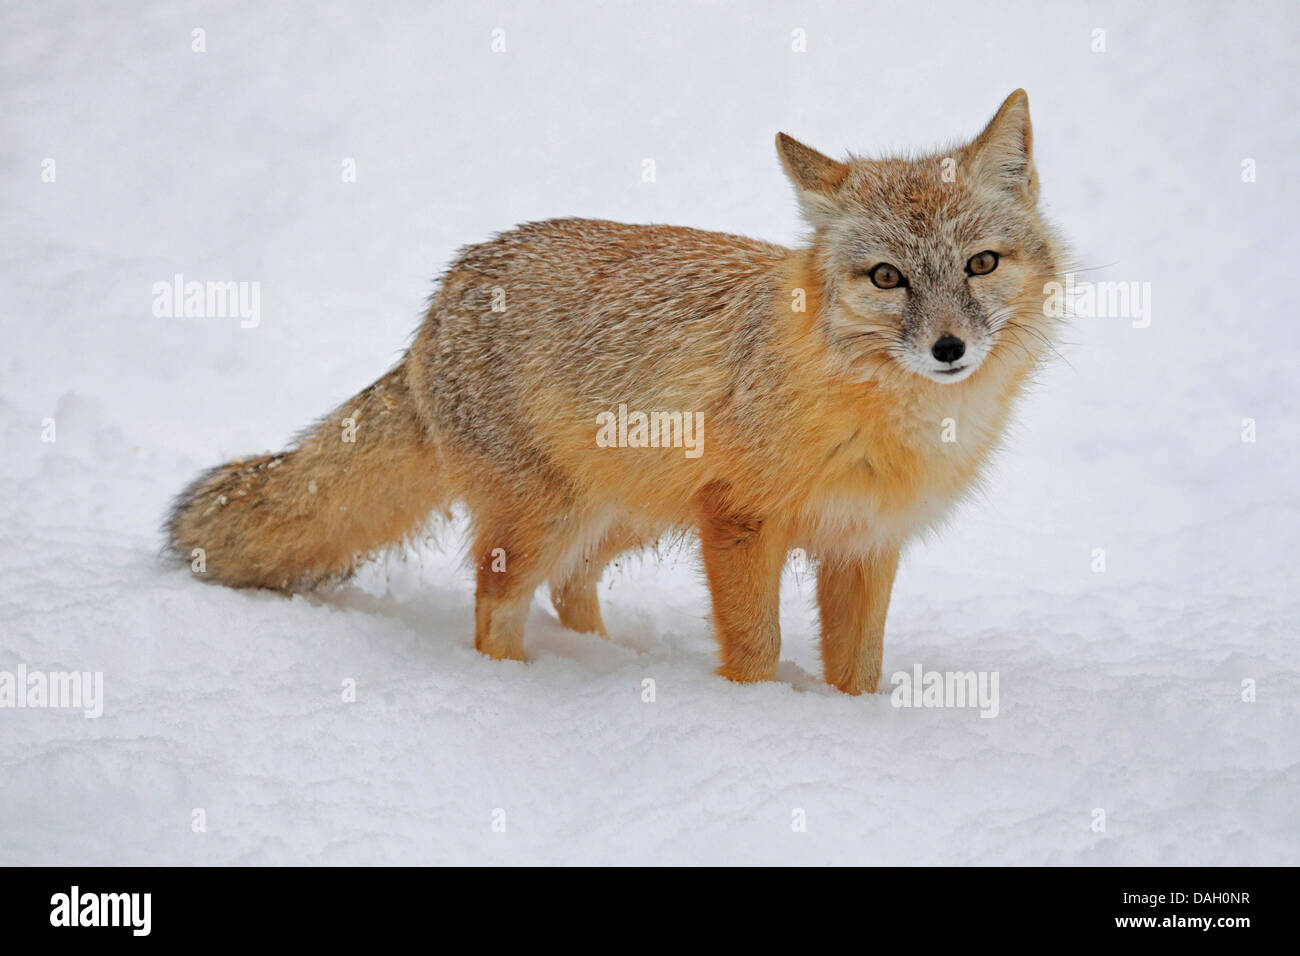 Corsac fox (Vulpes corsac), standing in the snow Stock Photo